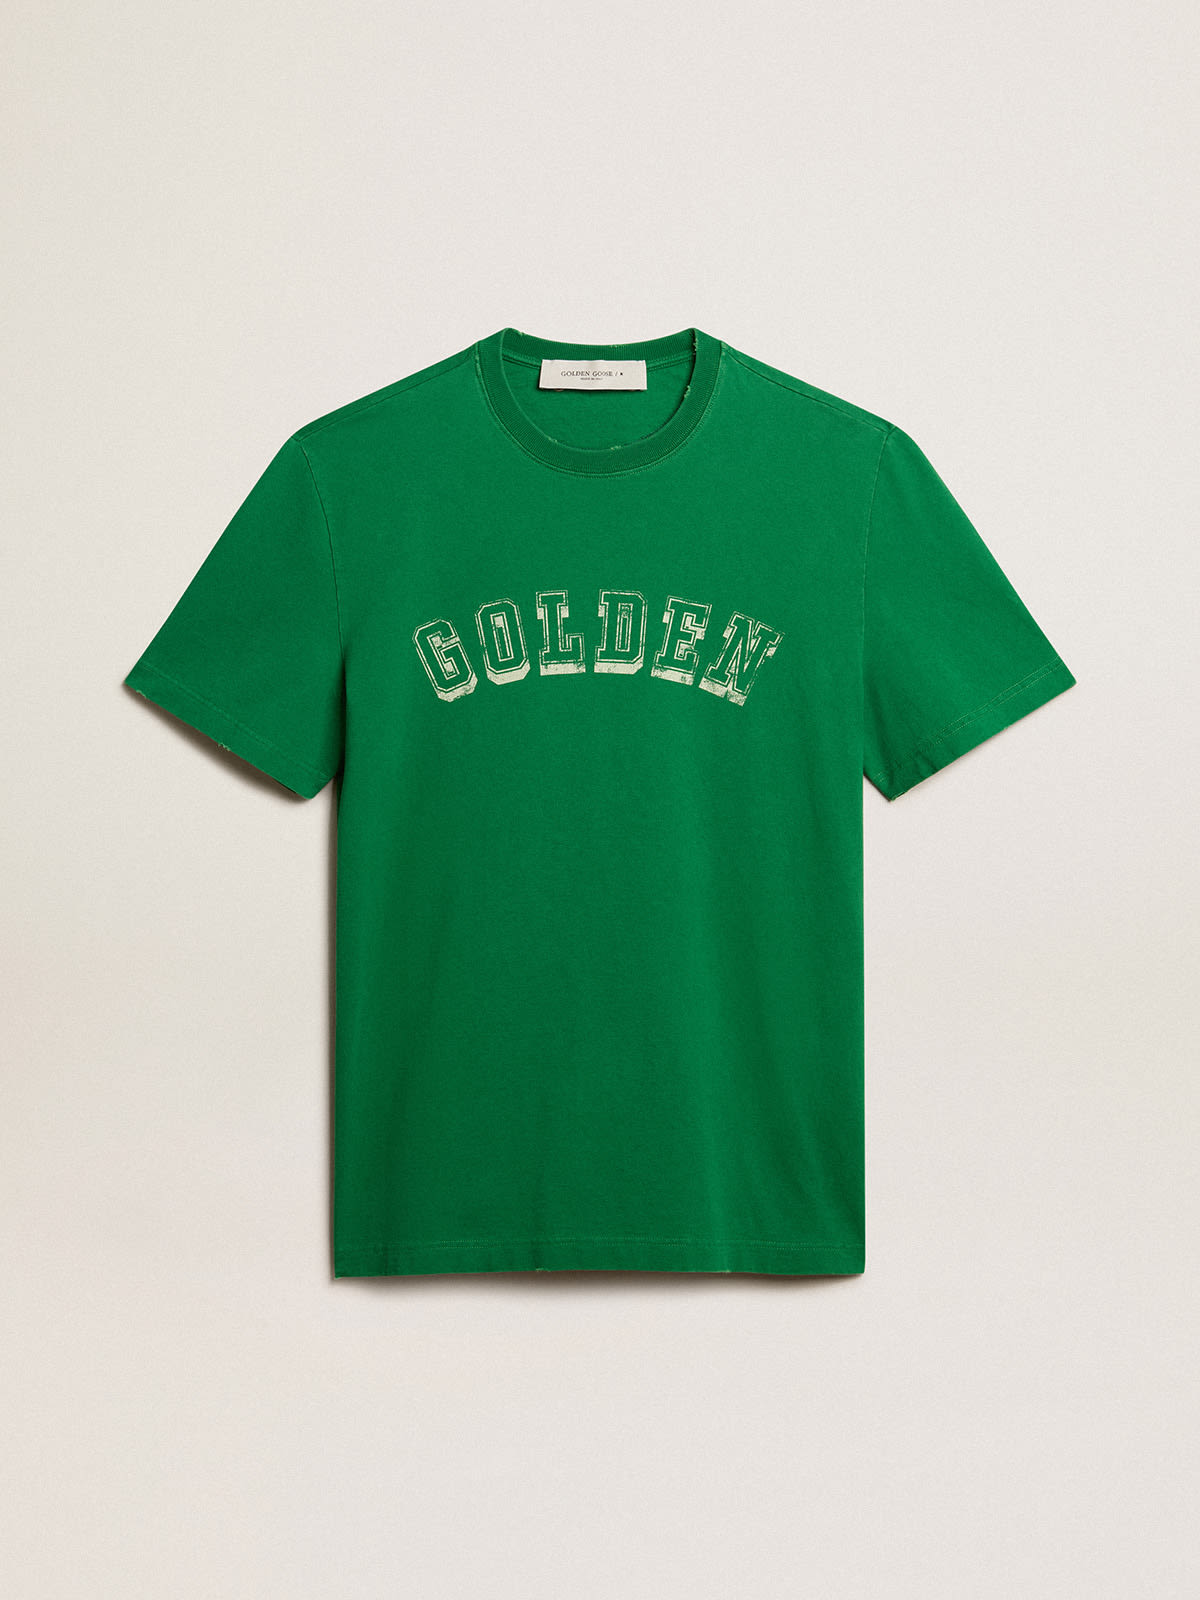 Golden Goose - Men’s green cotton T-shirt with lettering at the center in 